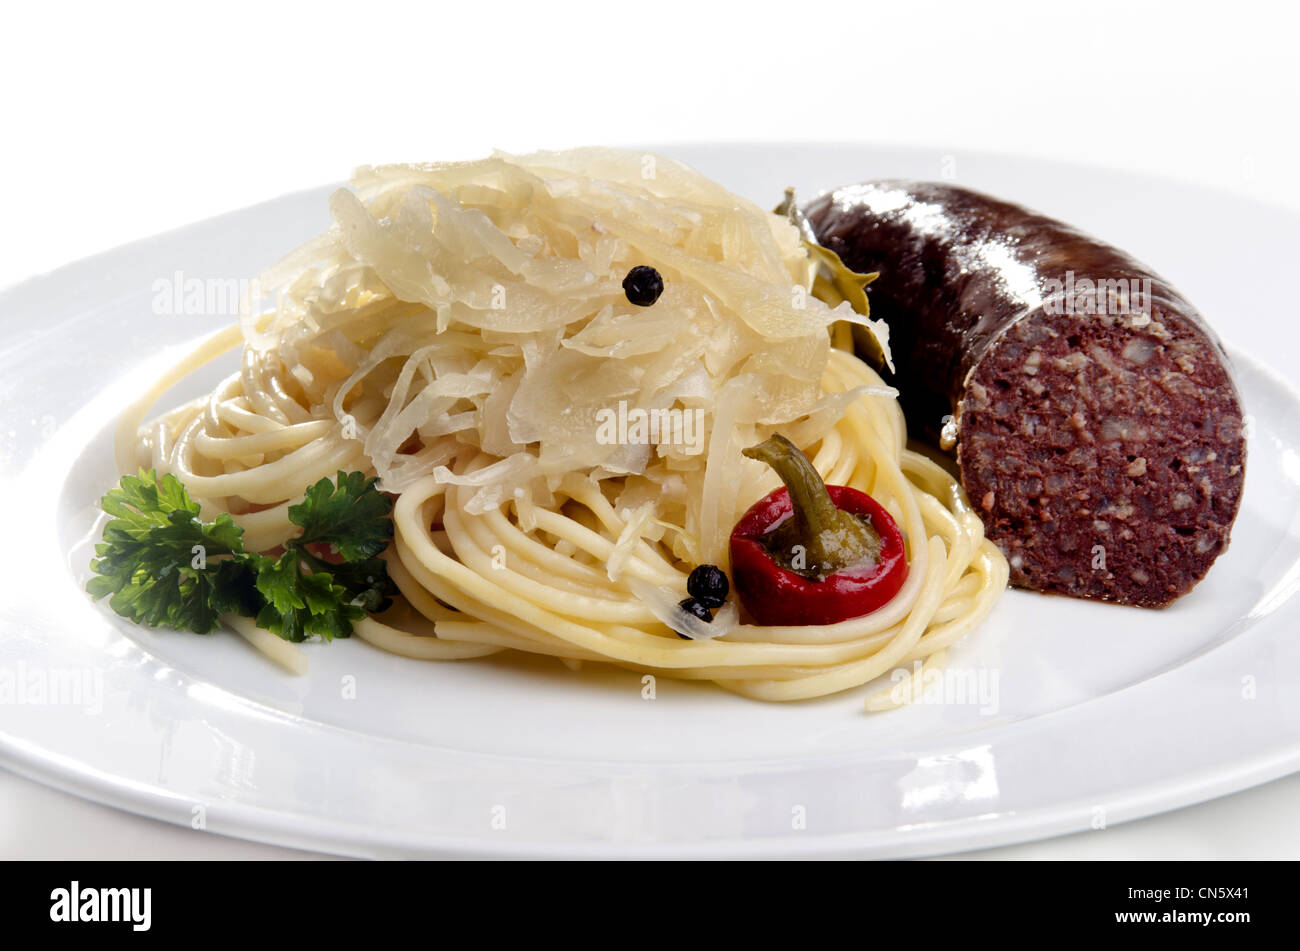 Steamed sauerkraut with grilled pork and spaghetti Stock Photo